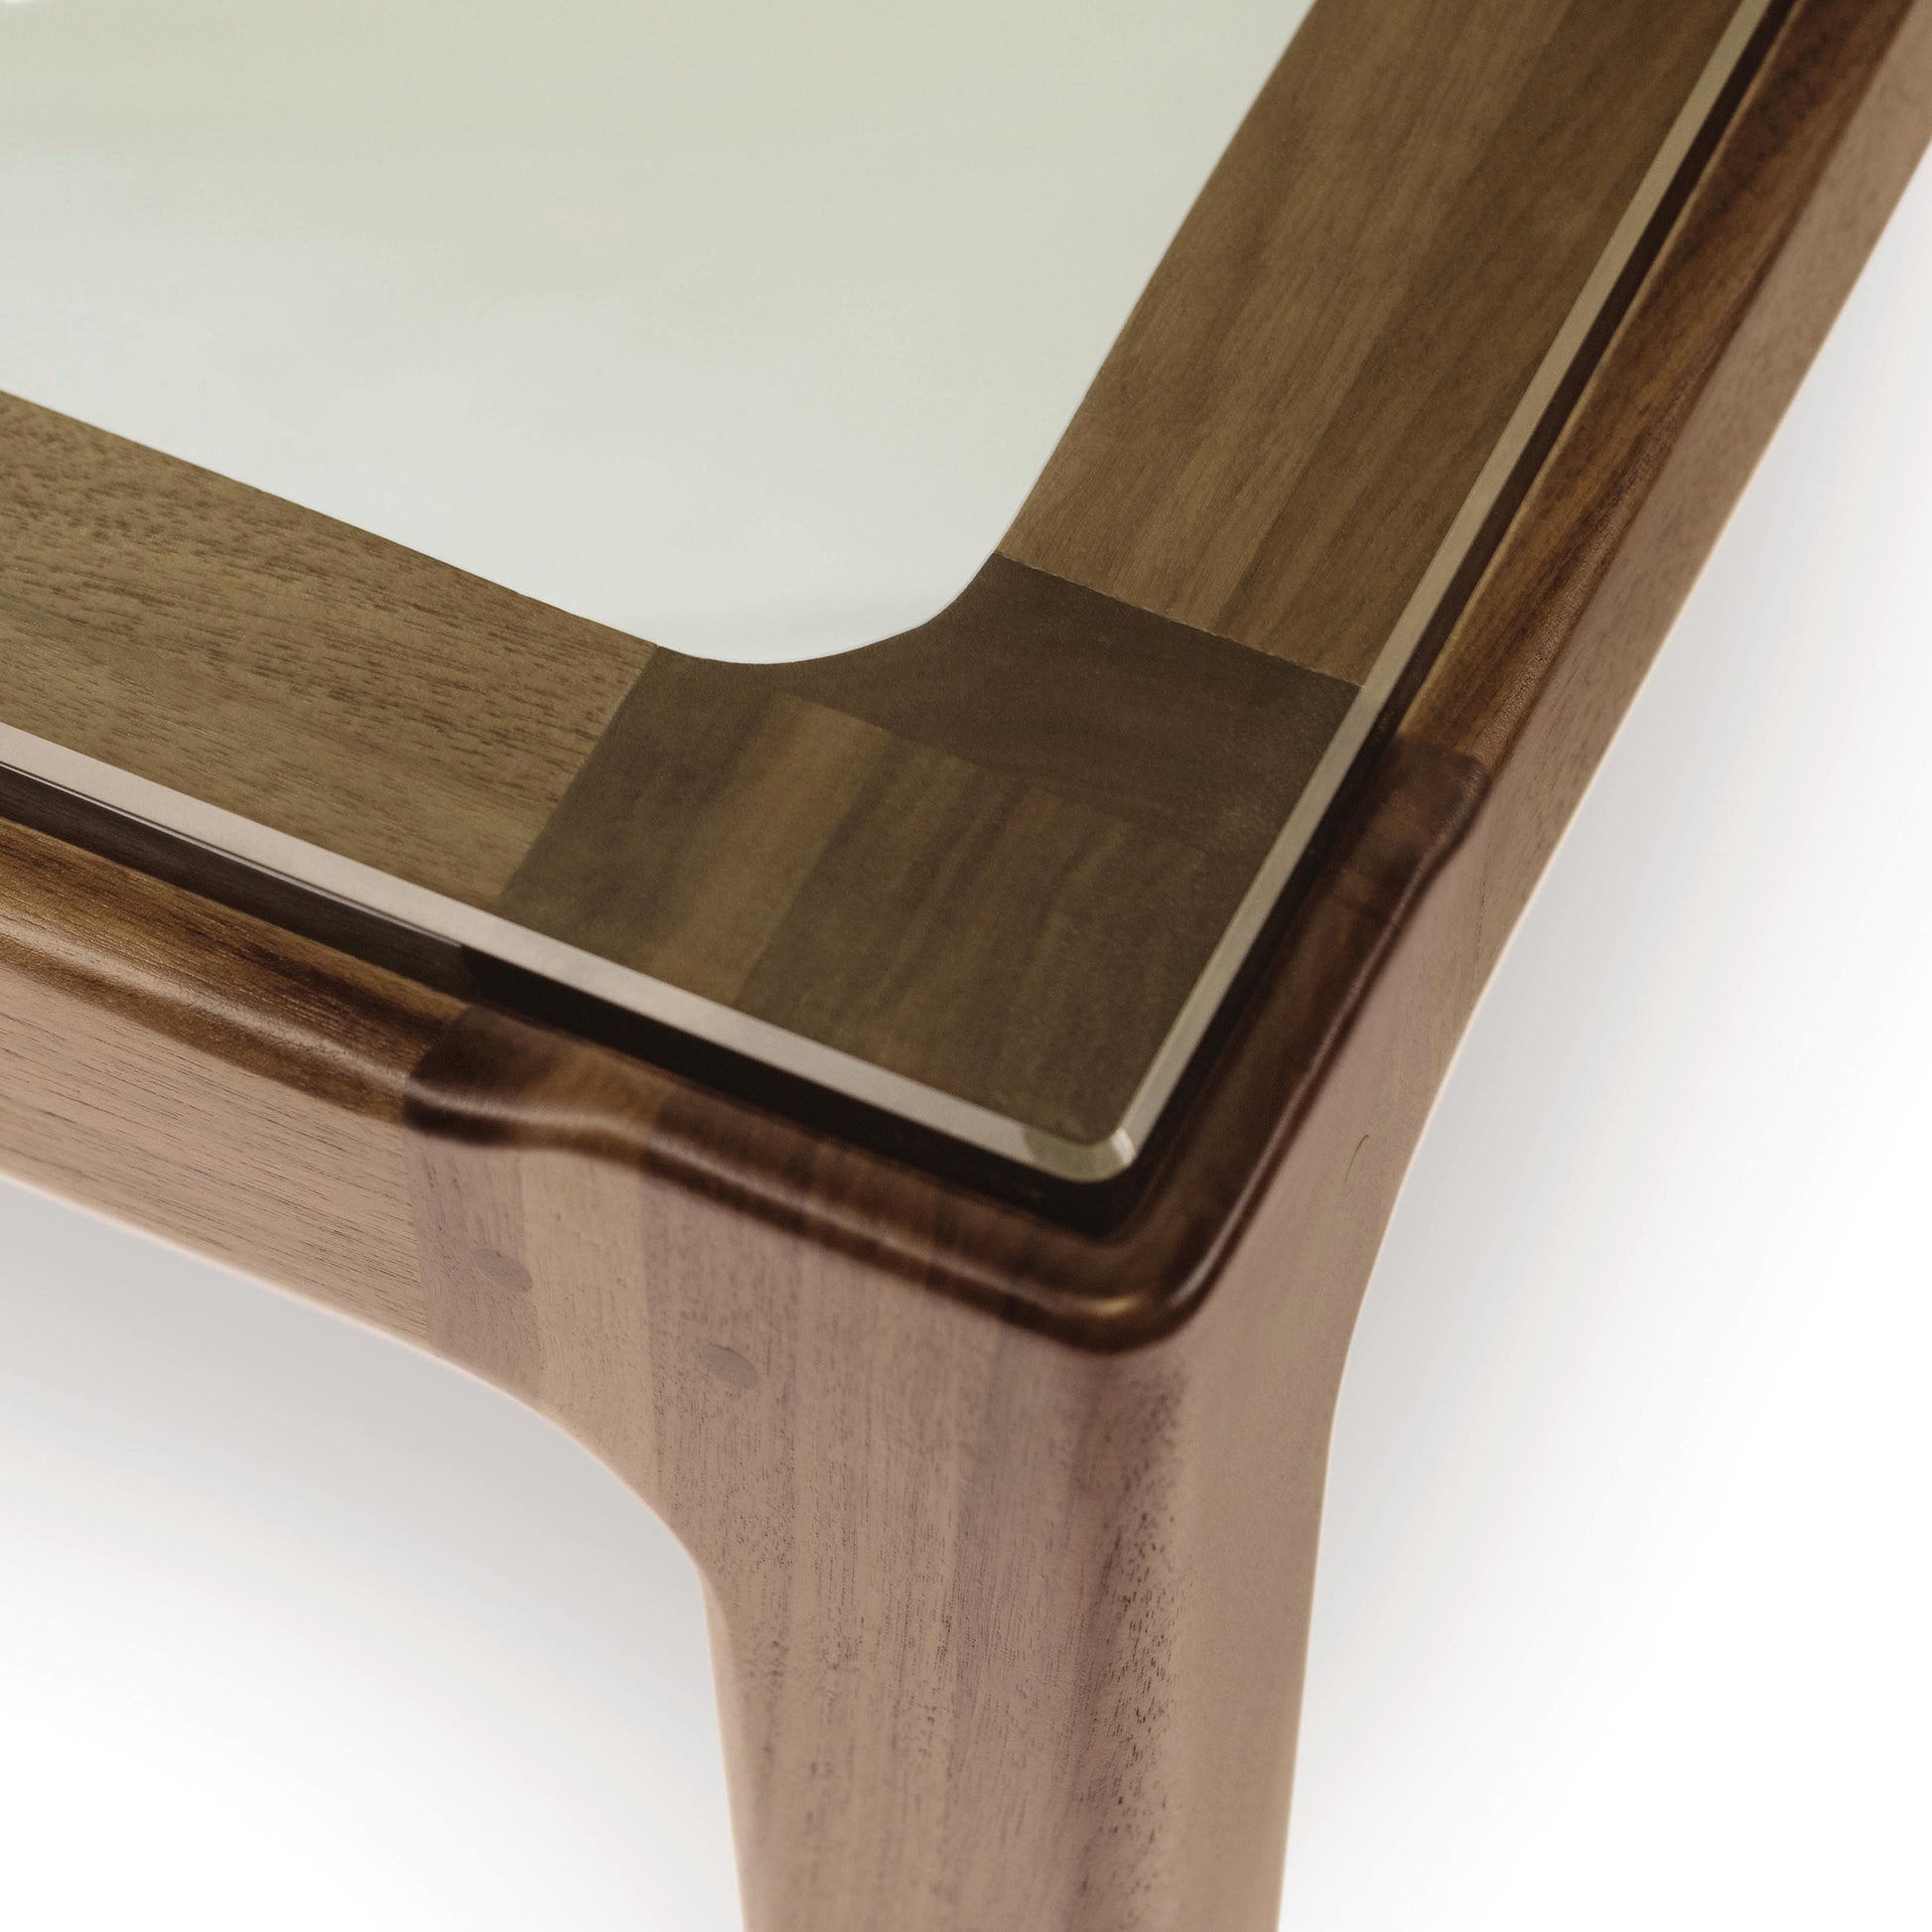 Corner of a Lisse Glass Top Dining Table by Copeland Furniture with a glass inset.